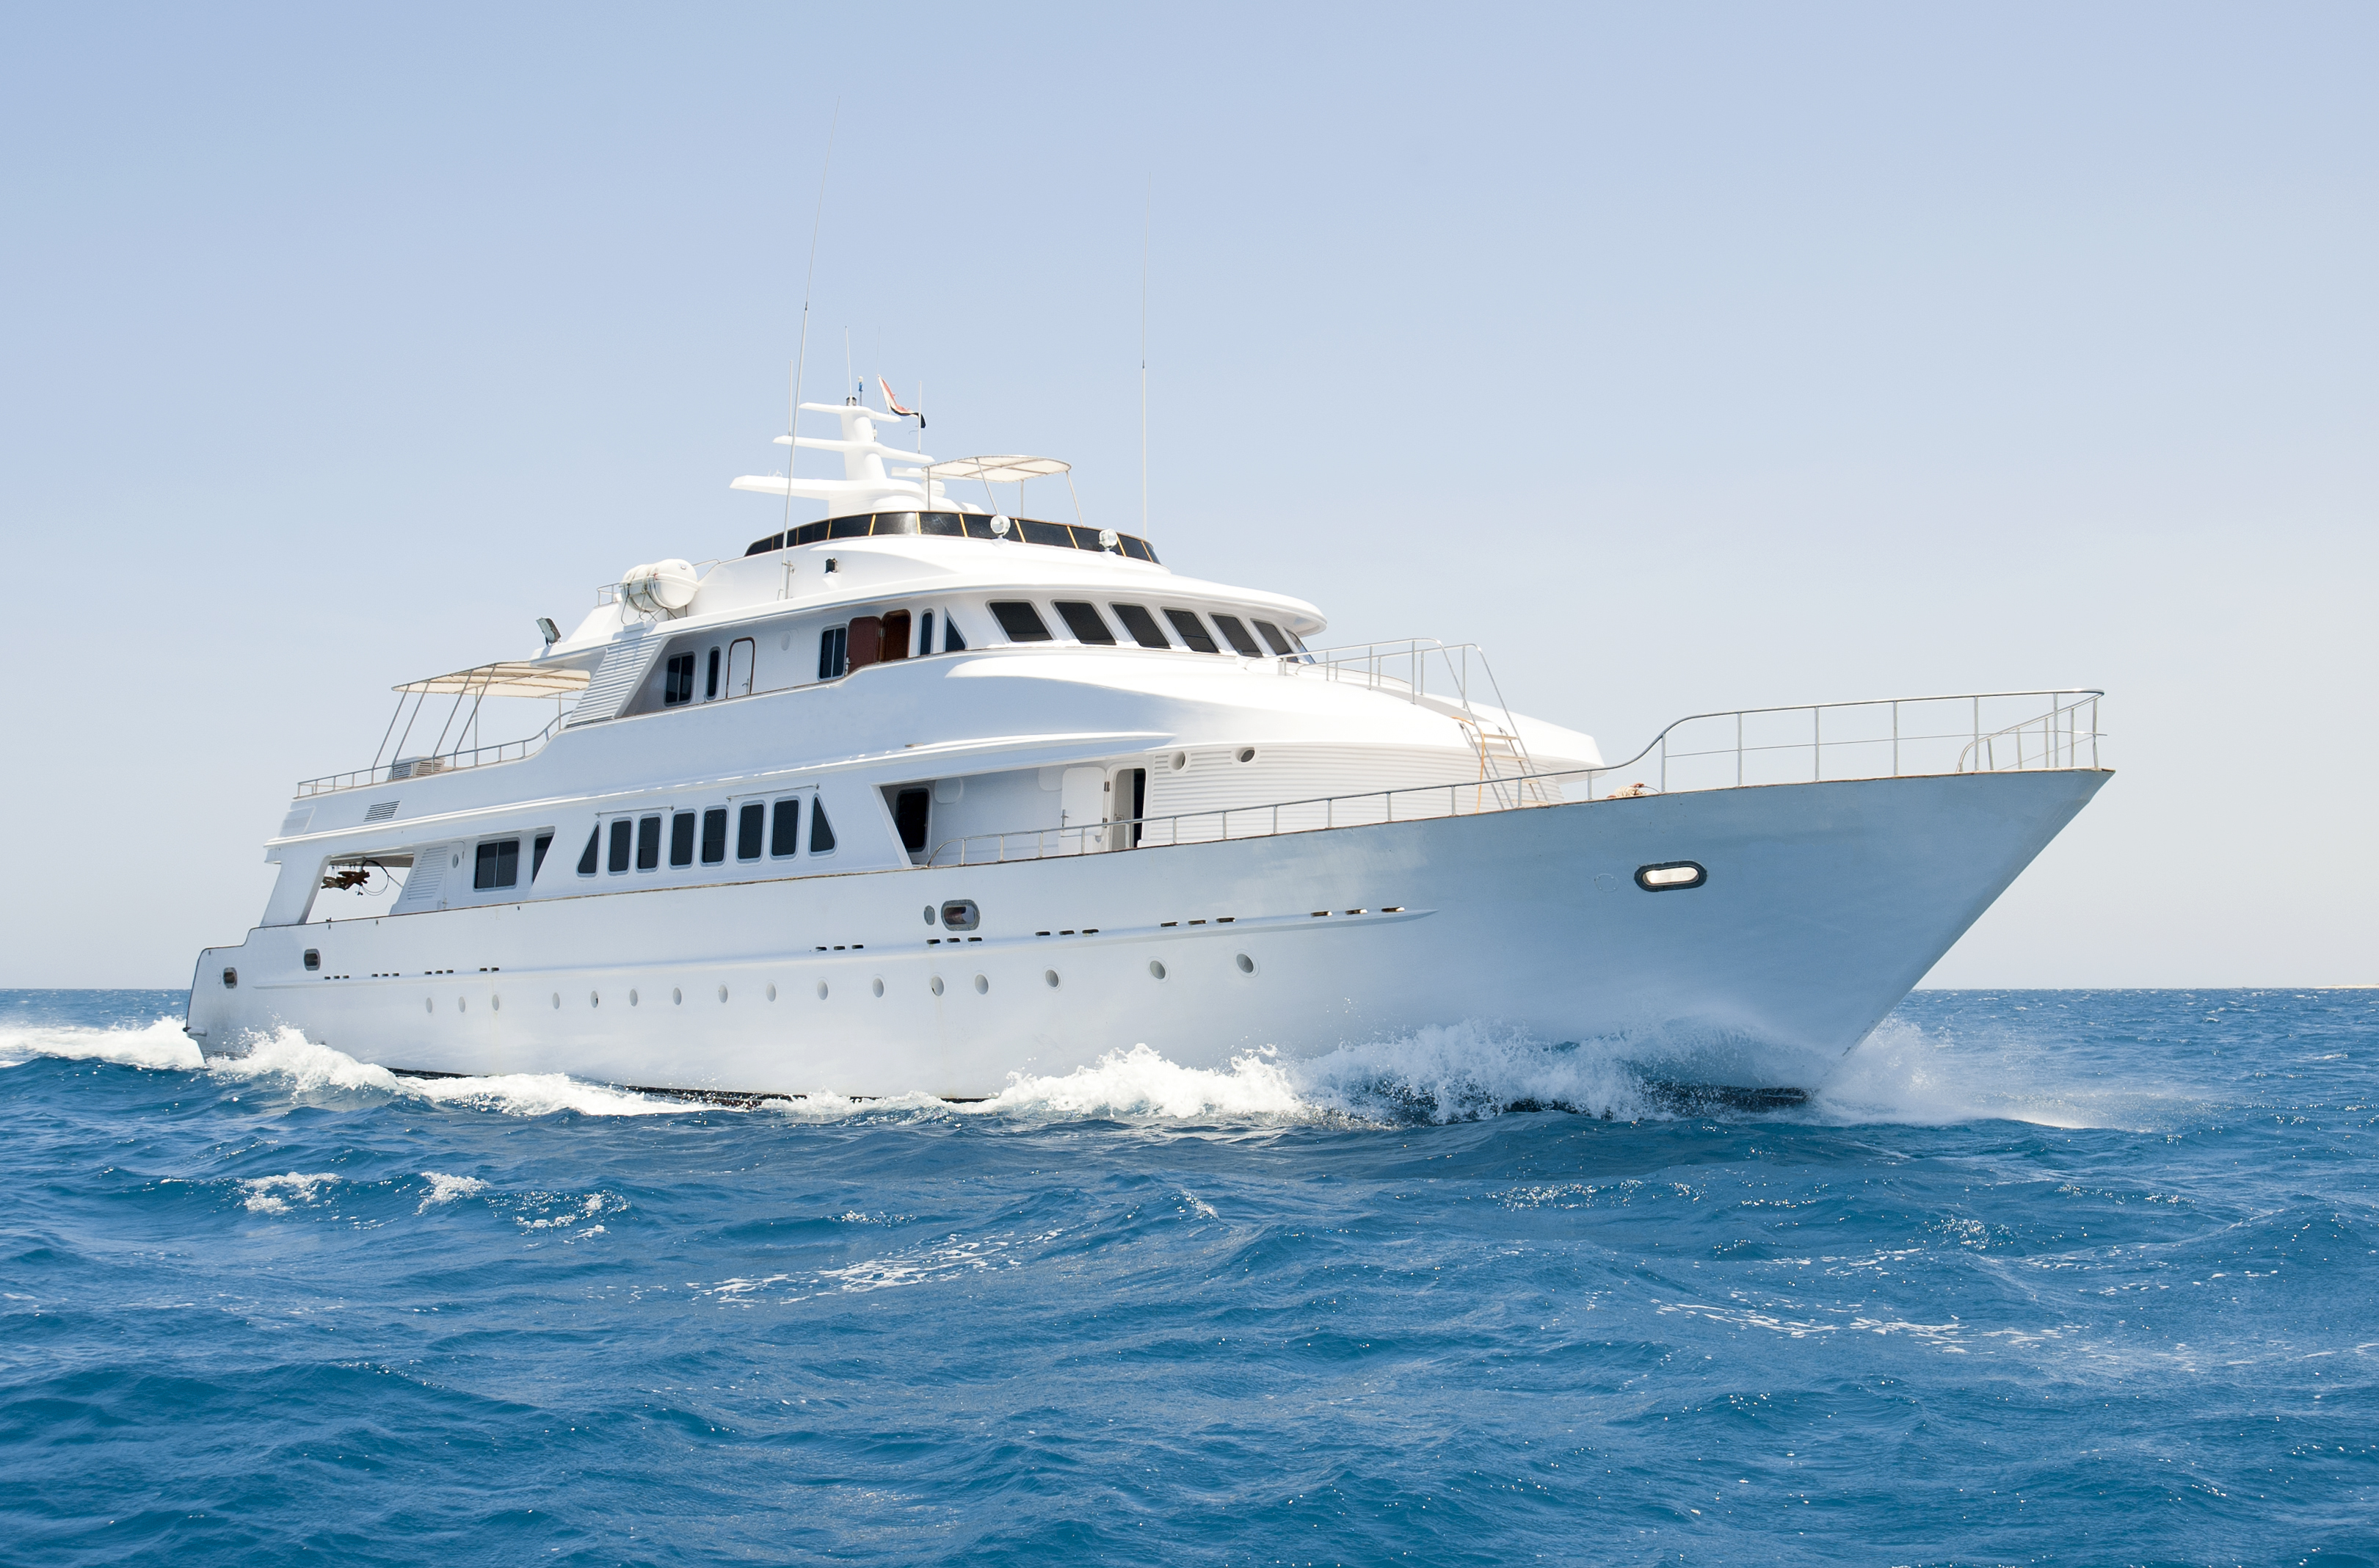 <p>The 2020 World Superyacht Award winner for Best Exterior Design, it's not hard to see why. It's functional, too. How many yachts have 180-degree panoramic view windows?</p>